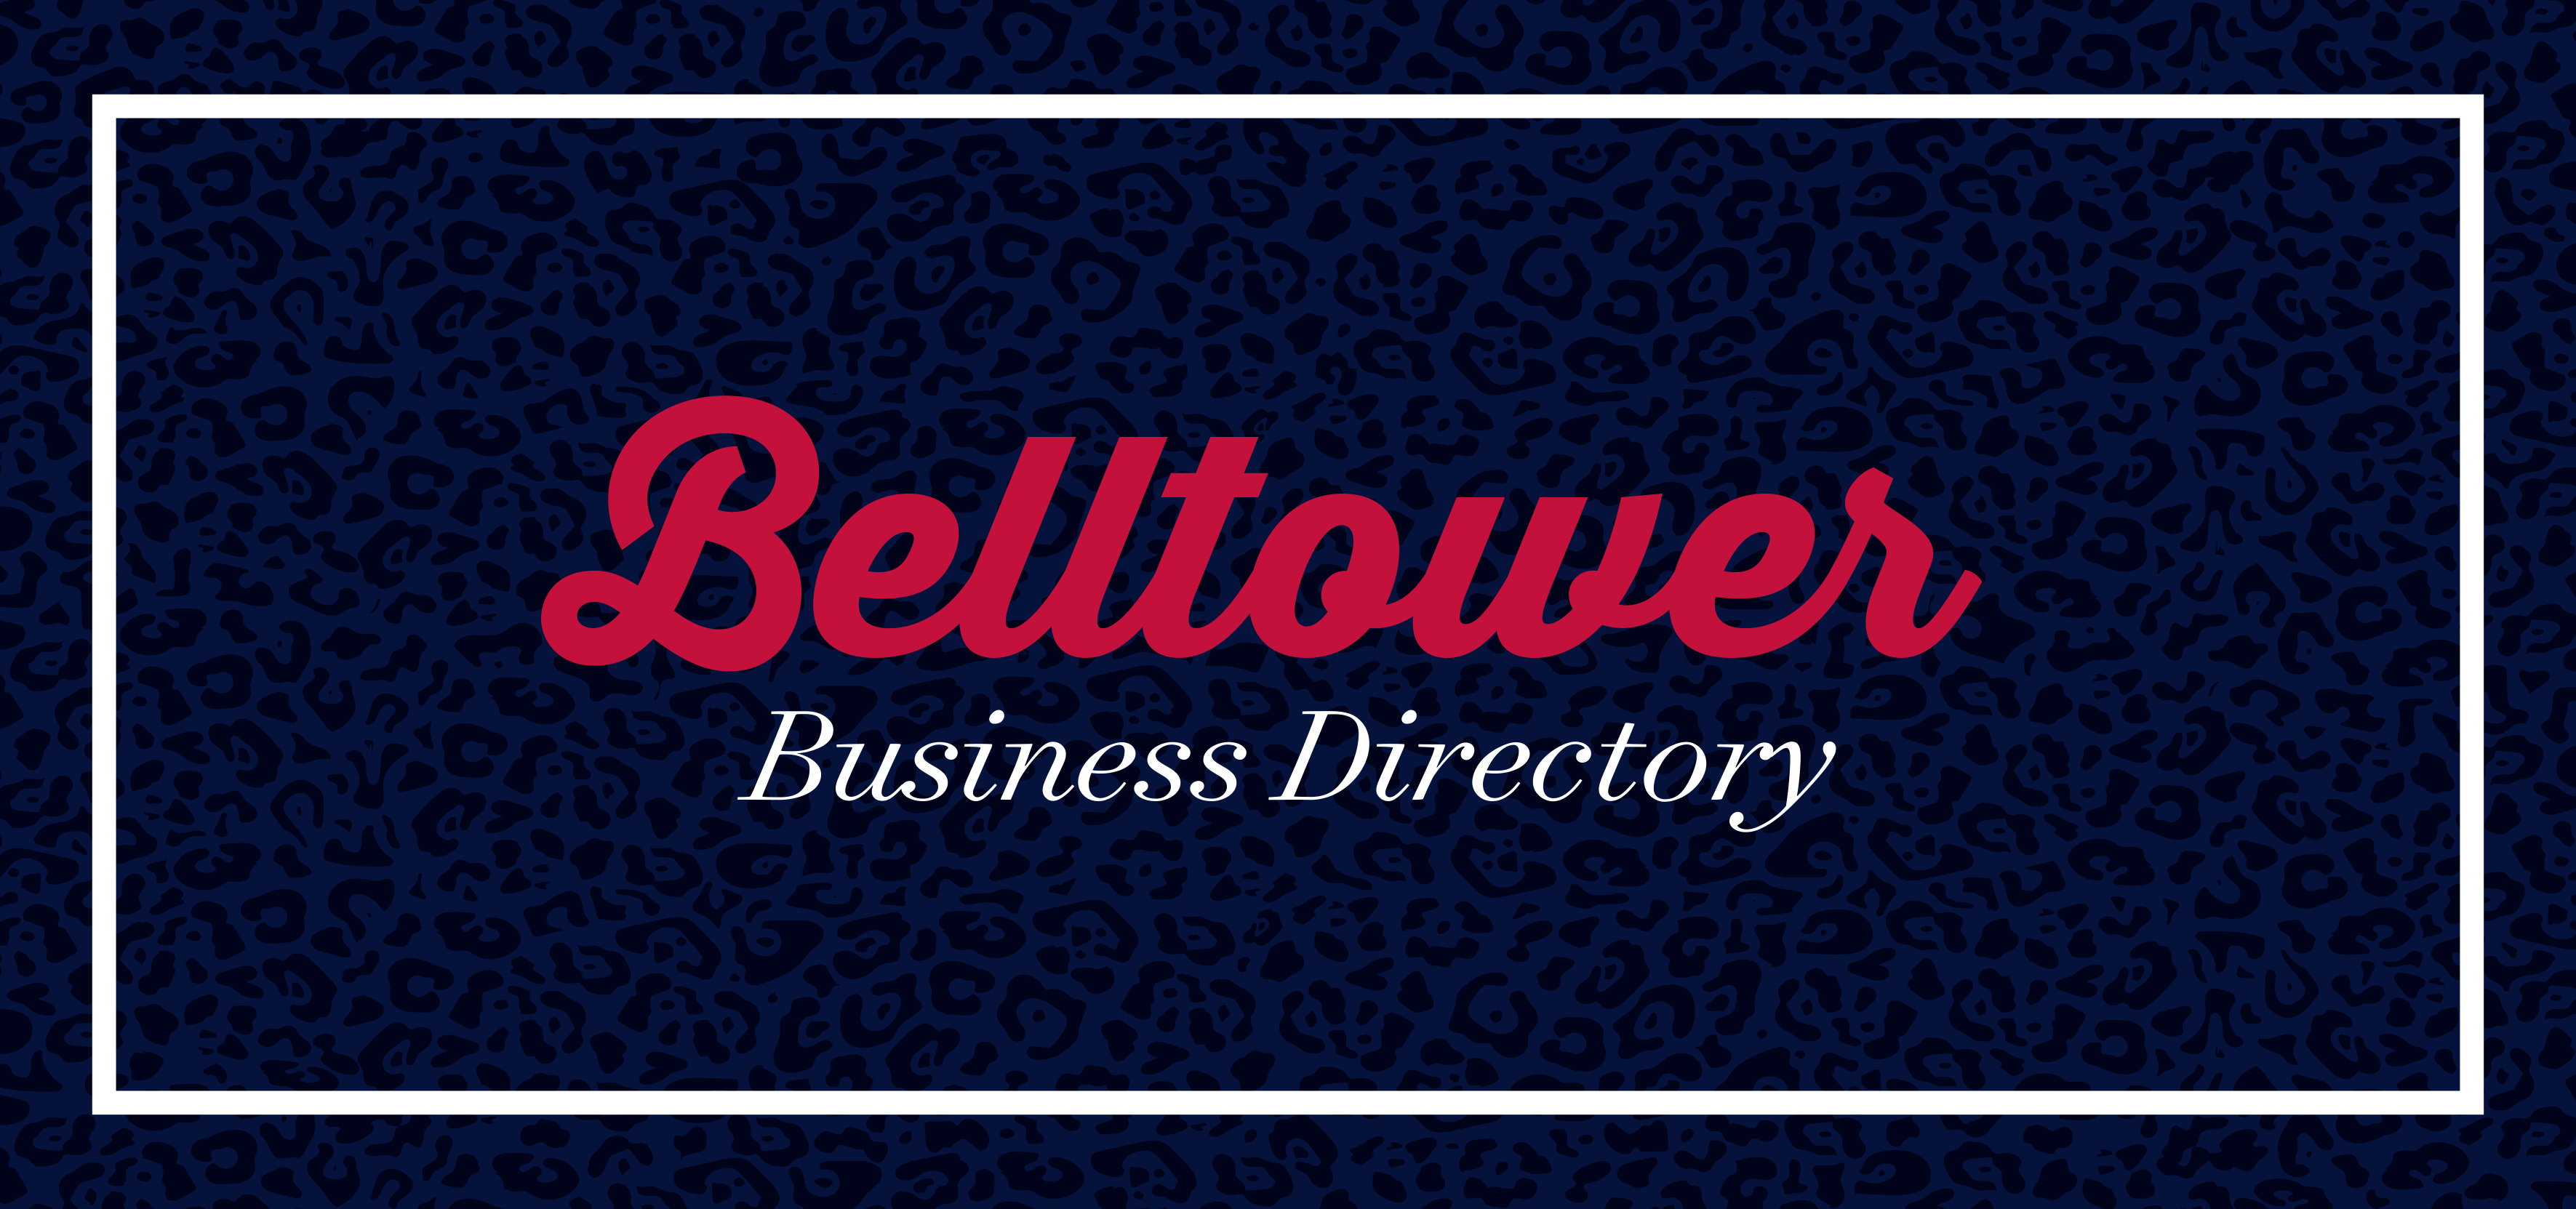 Belltower Business Directory with jag print behind it